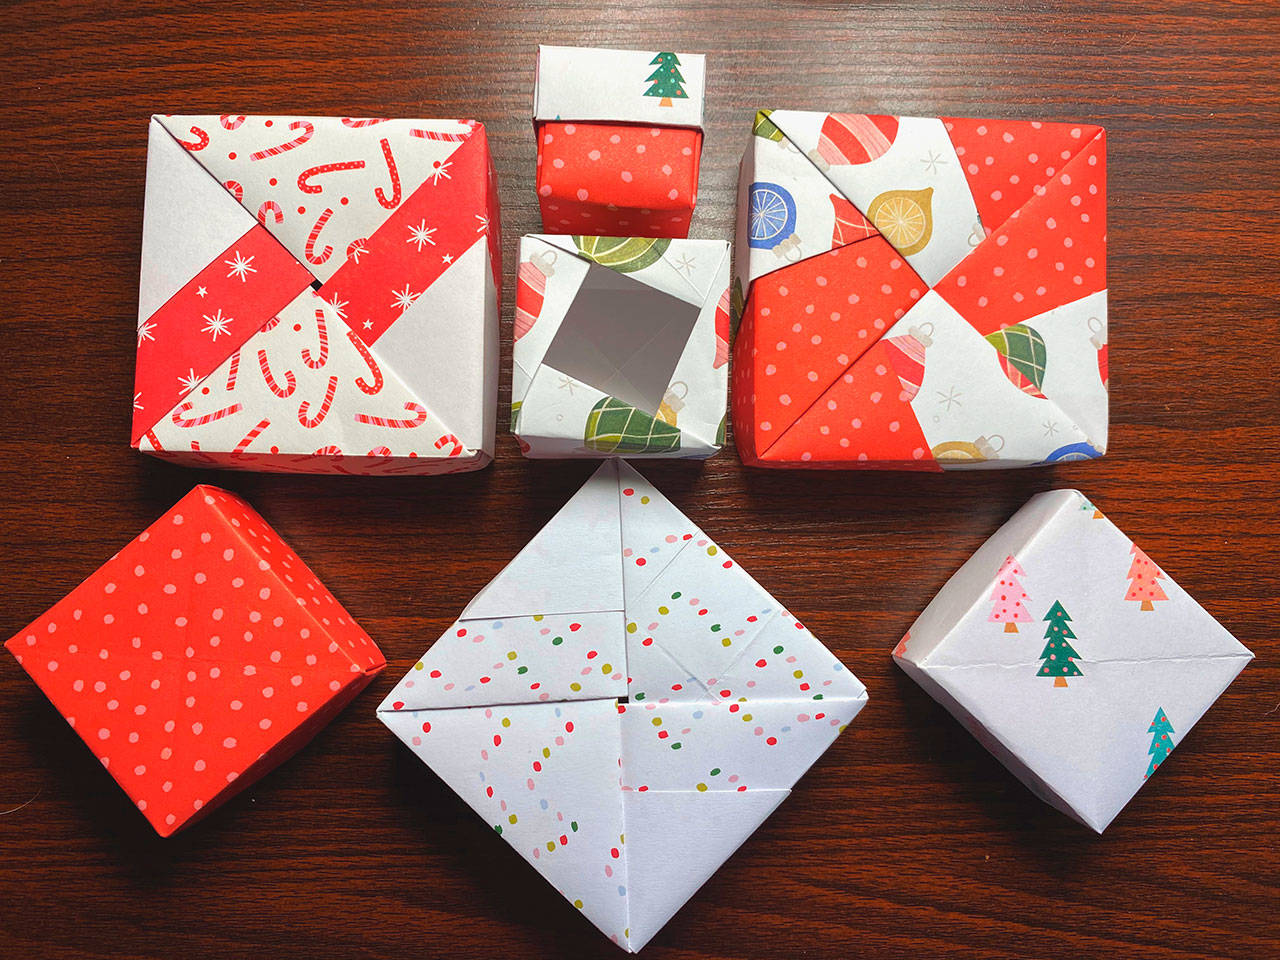 Learn how to make origami boxes using kits and a Zoom workshop on Dec. 17, part of the North Olympic Library System’s CreativiTea series. Photo courtesy of North Olympic Library System